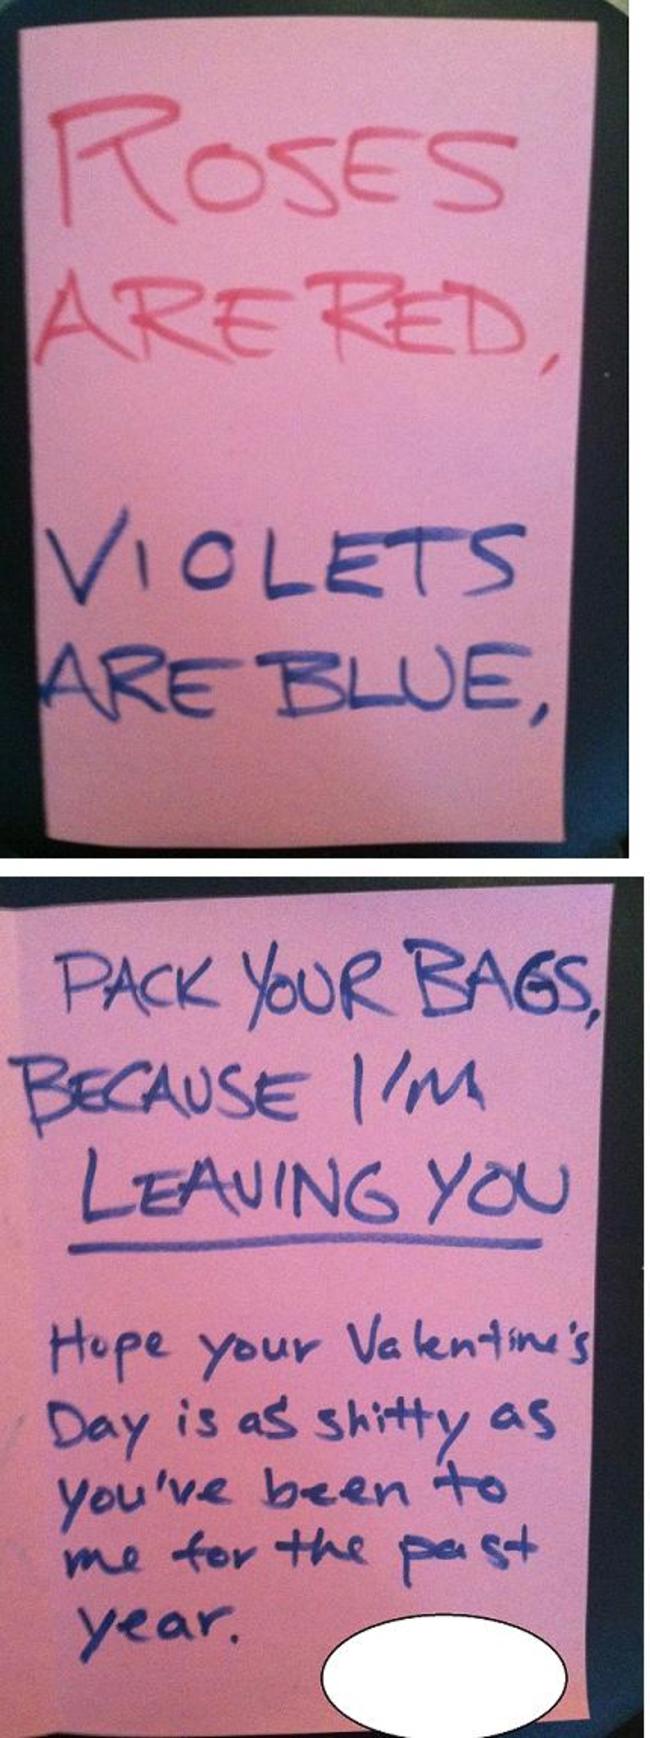 roses are red violets are blue break up - Roses Arered Violets Are Blue, Pack Your Bags, Because I'M Leaving You Hope your Valentine's Day is as shitty as you've been to me for the past year.